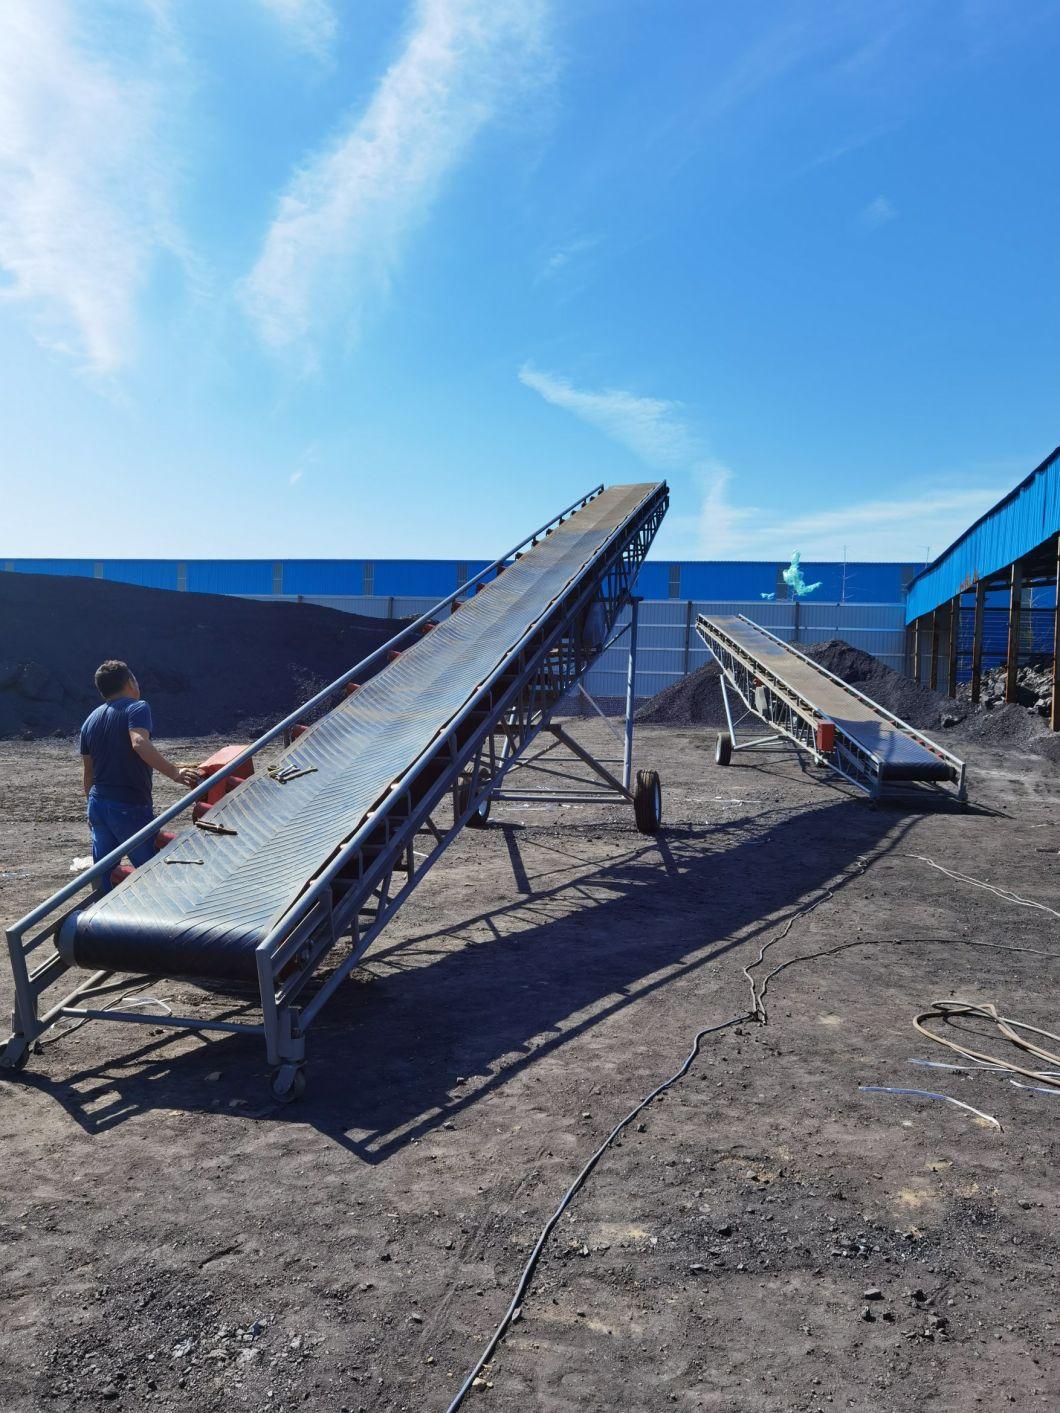 Mobile Rubber Belt Conveyor for Bags